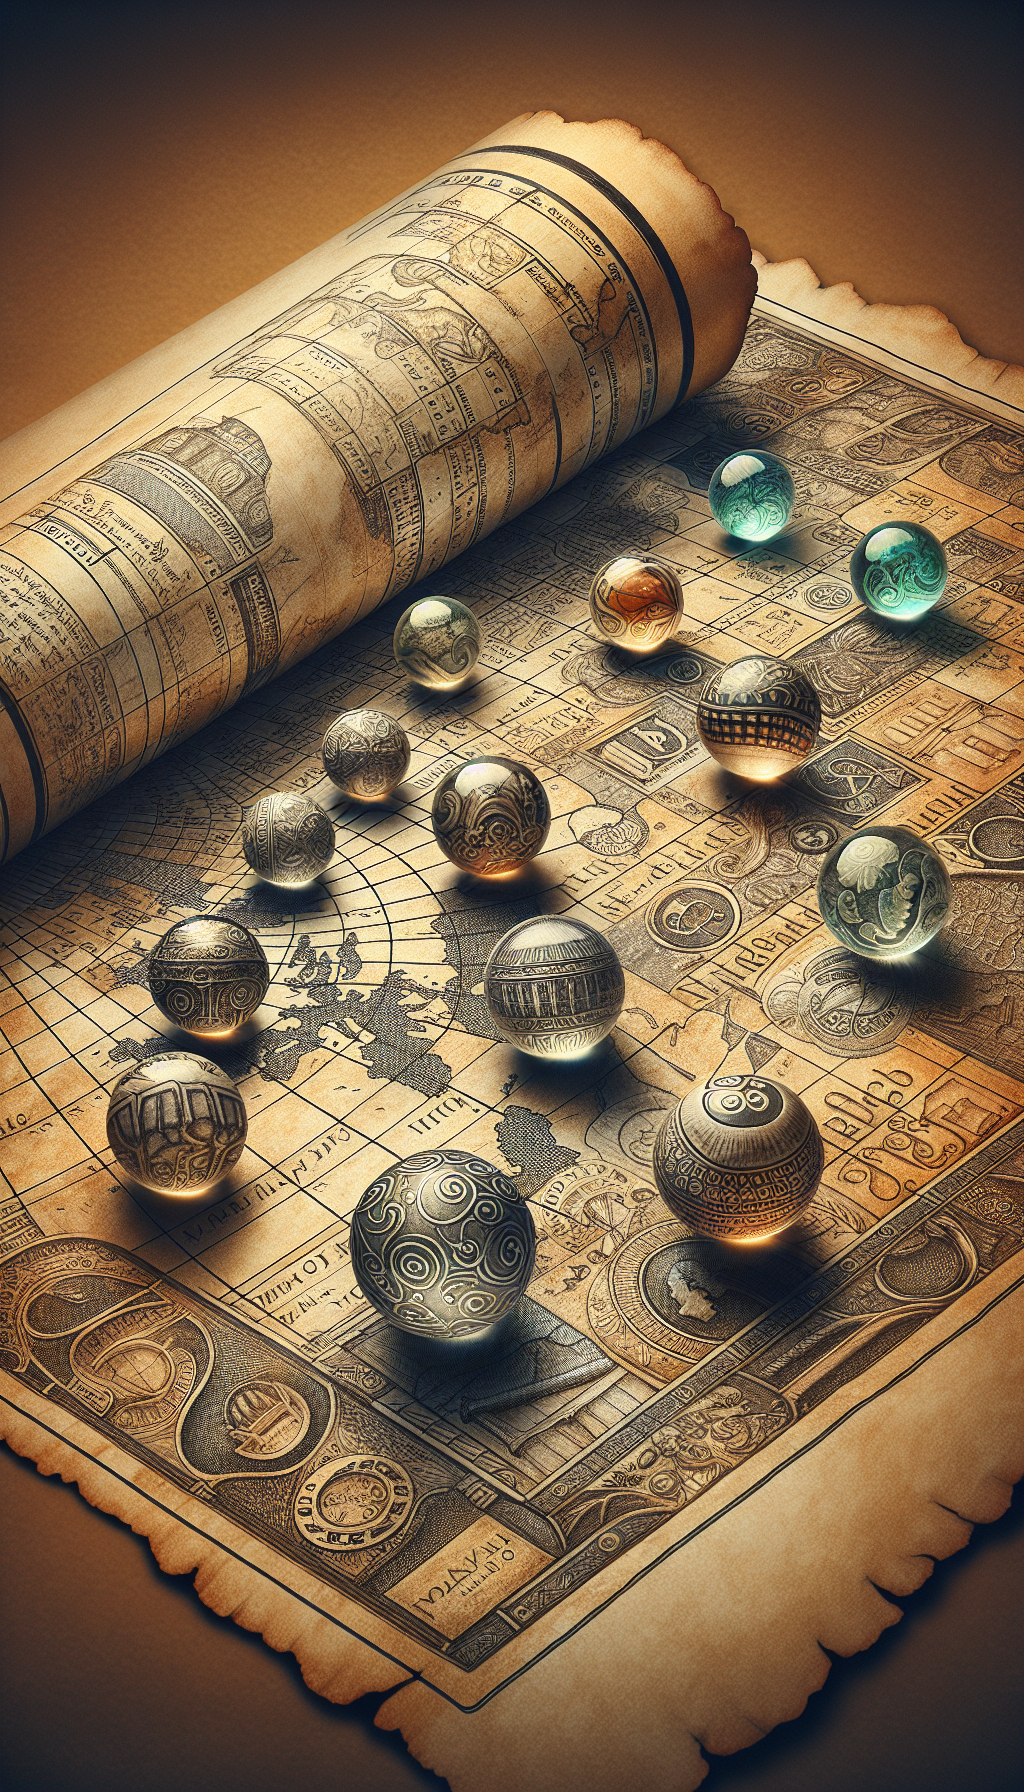 An illustration depicting a timeworn scroll unfurled across a vintage map, with beautifully detailed antique marbles rolling along its path, highlighting key historical landmarks and periods. Each marble casts a shimmering shadow that transforms into faded currency symbols, subtly suggesting their escalating value through time. The diverse artistic styles along the route signify the evolution of their cultural significance.